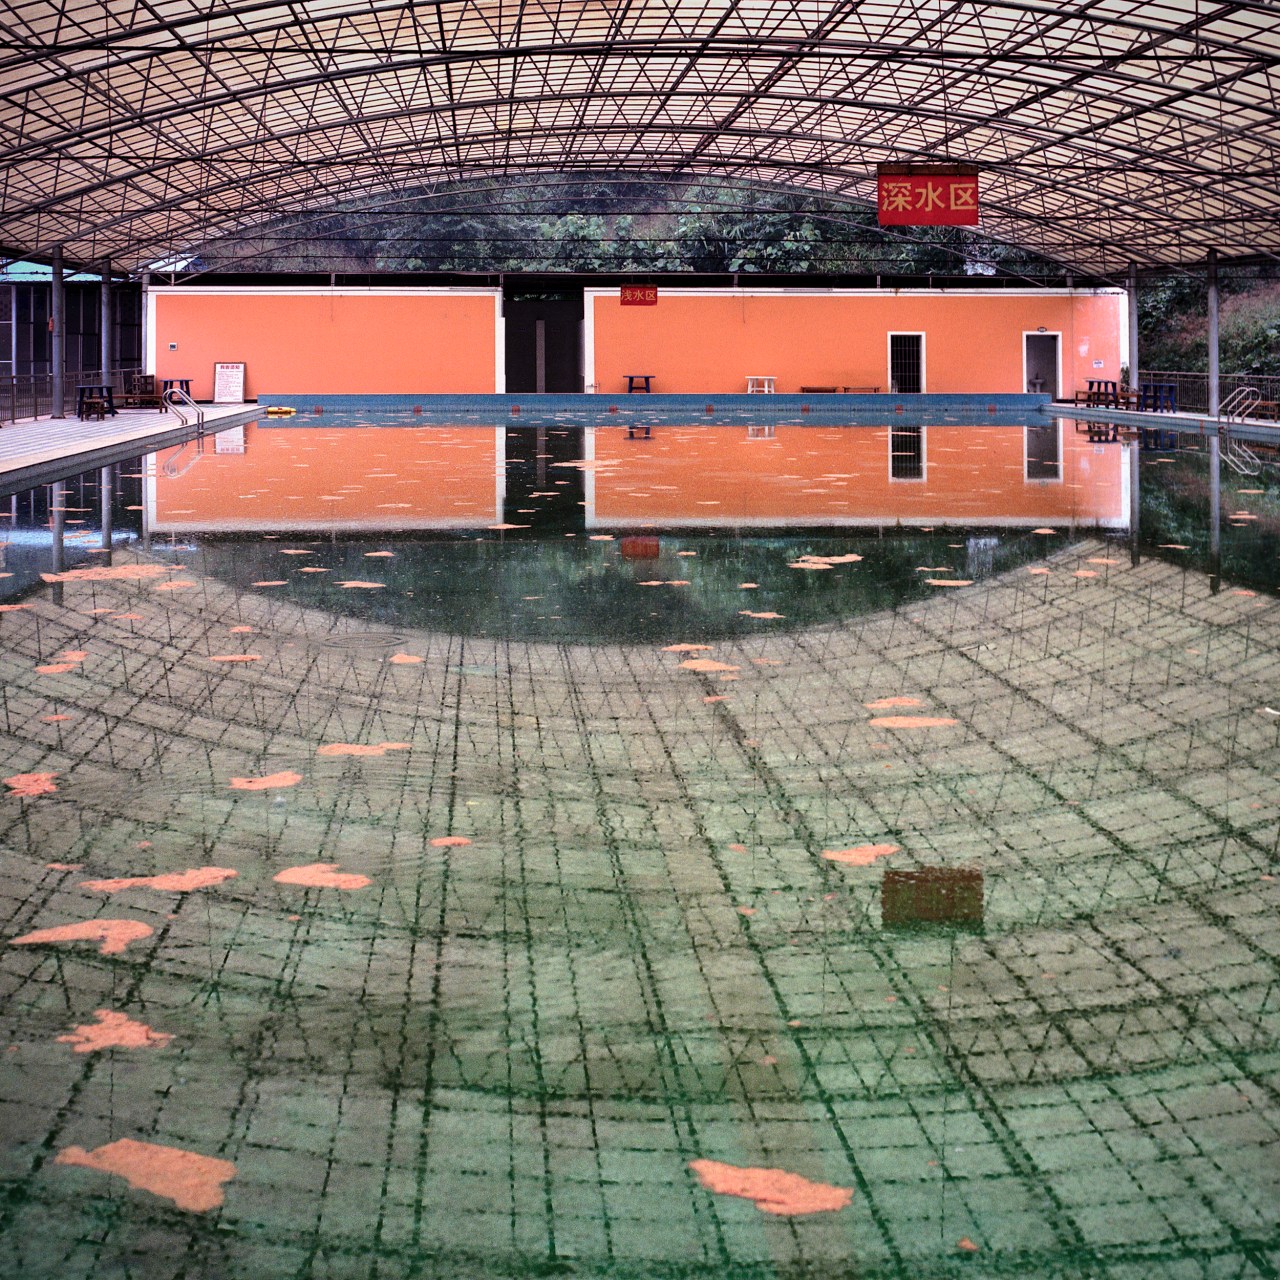 A swimming pool was built as part of a sports complex intended for residential use.